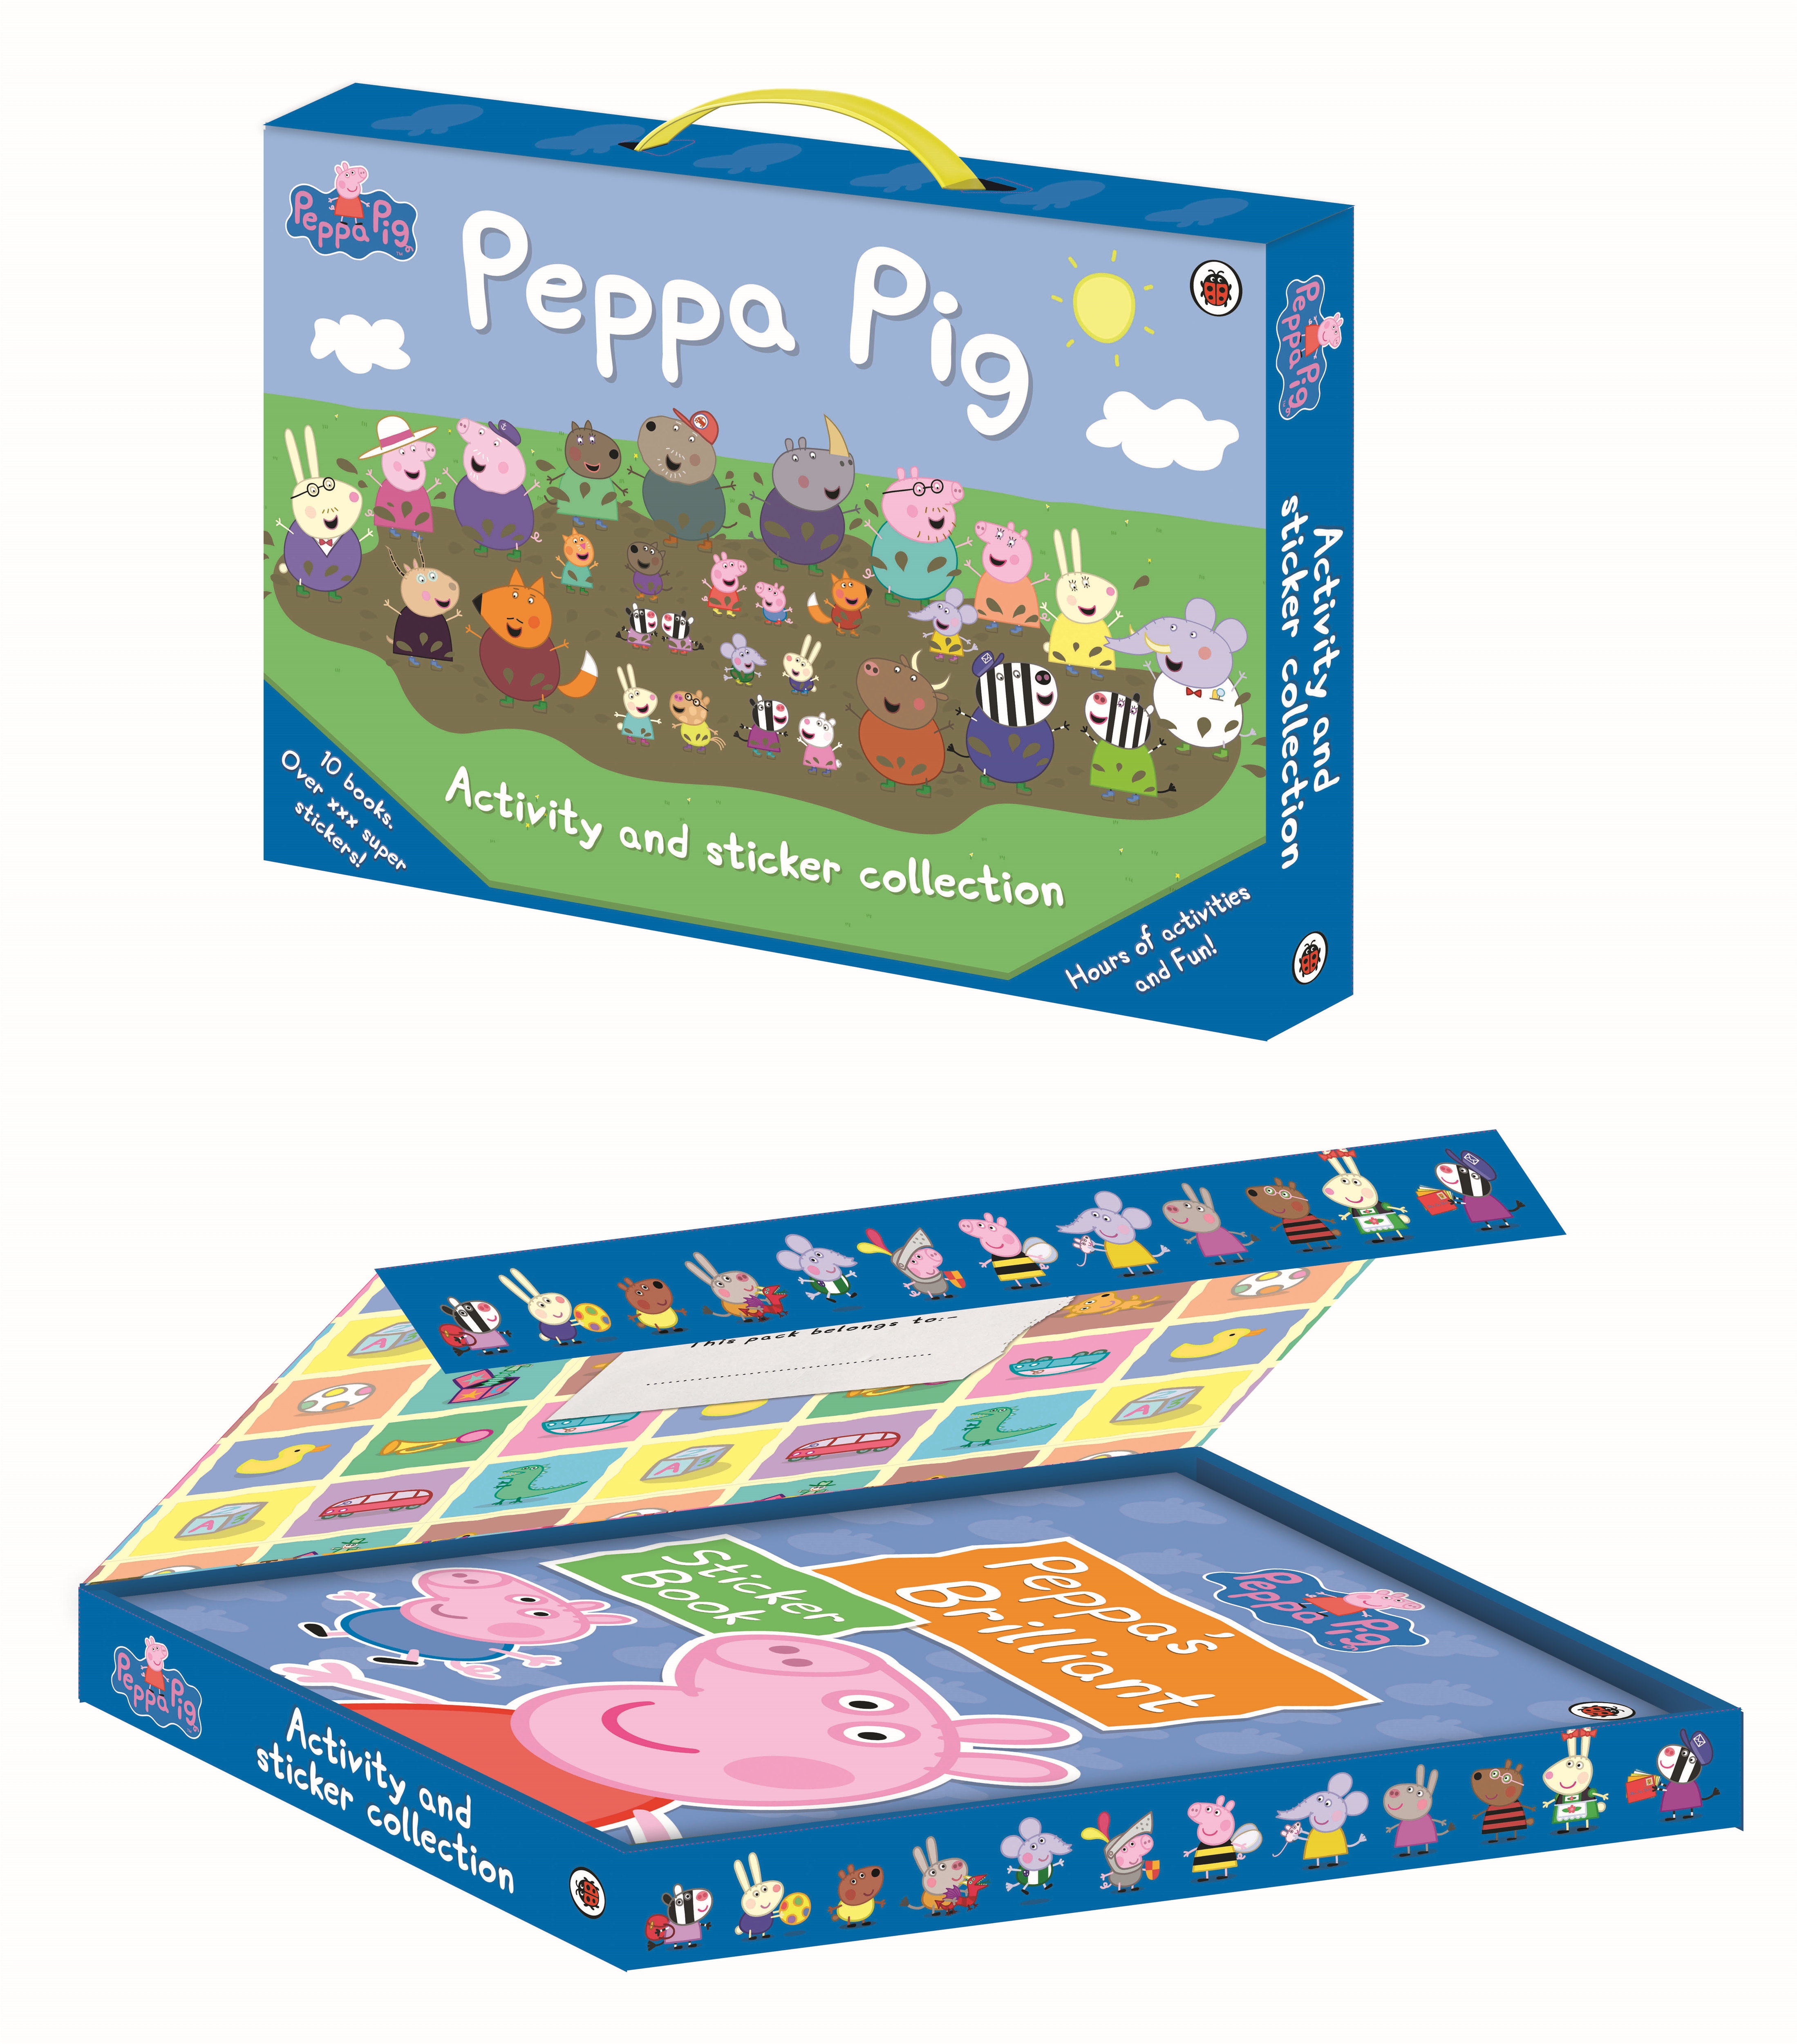 PEPPA PIGS ACTIVITY CARRY CASE - ACTIVITY AND STICKER COLLECTION (10 BOOKS)